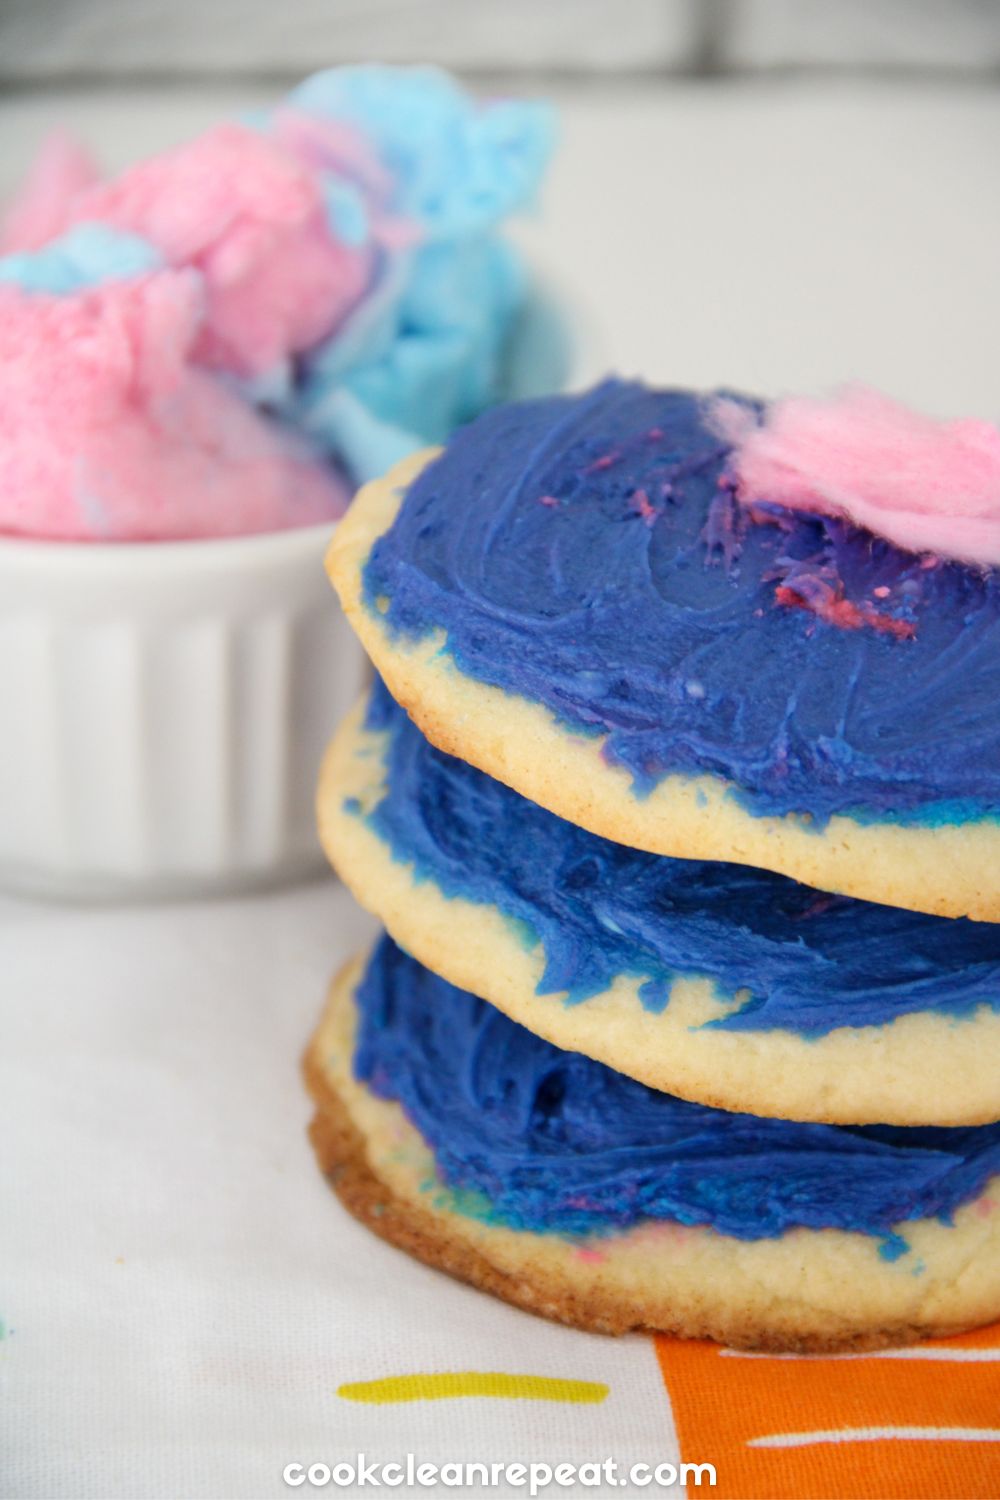 three cookies stacked on top of each other with cotton candy behind them